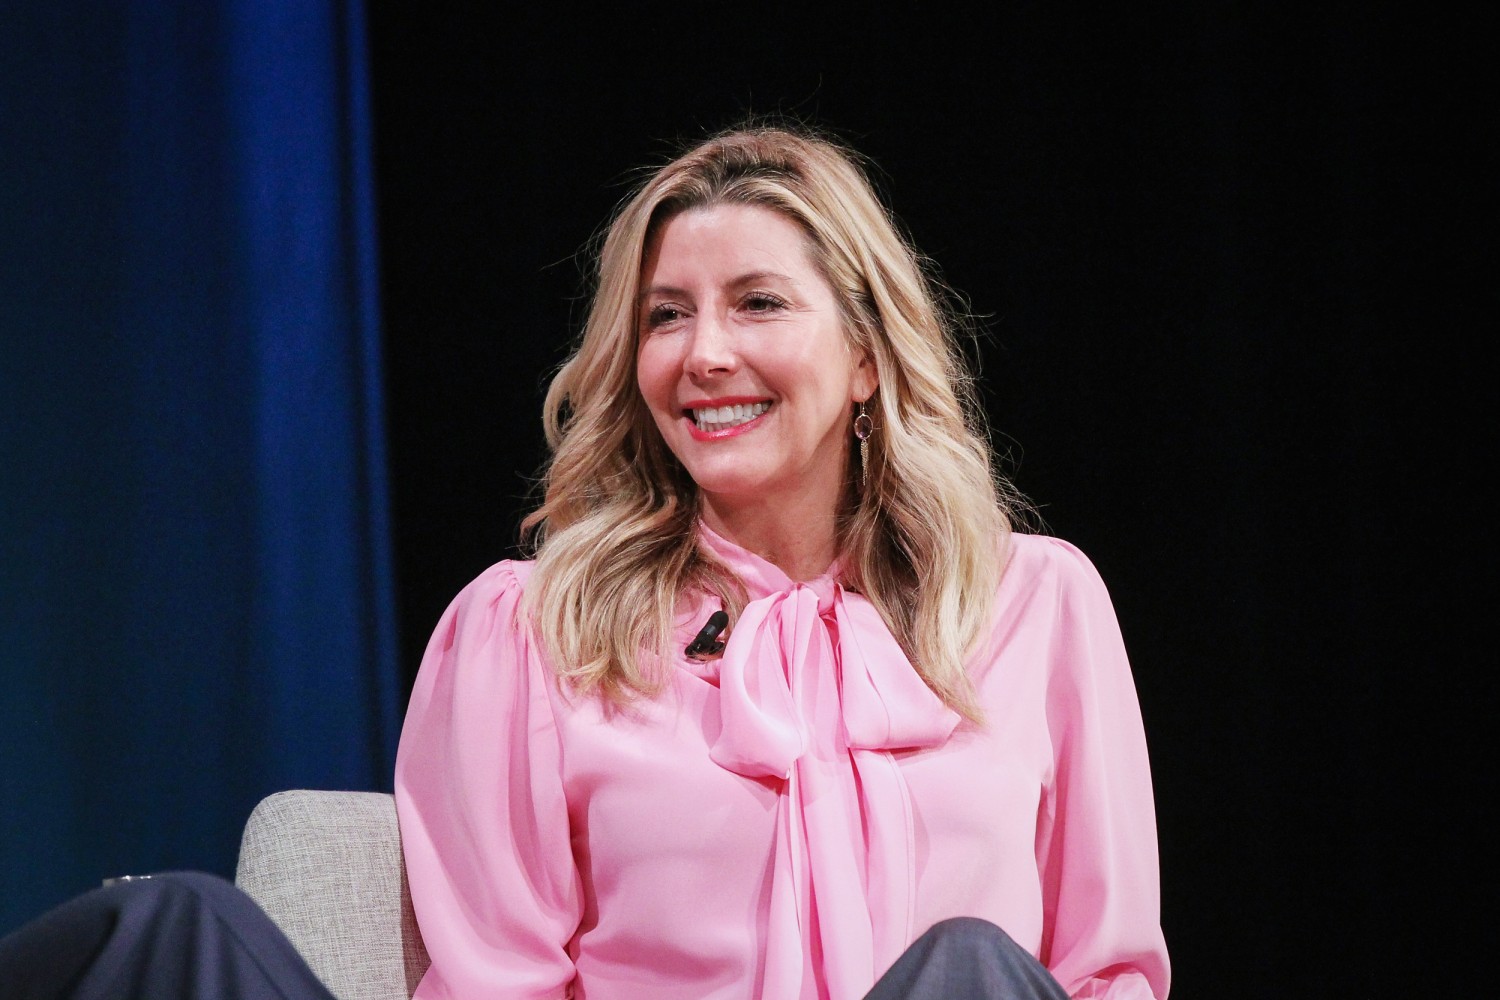 SPANX by Sara Blakely: Want Maximum Slimming? Introducing The NEW